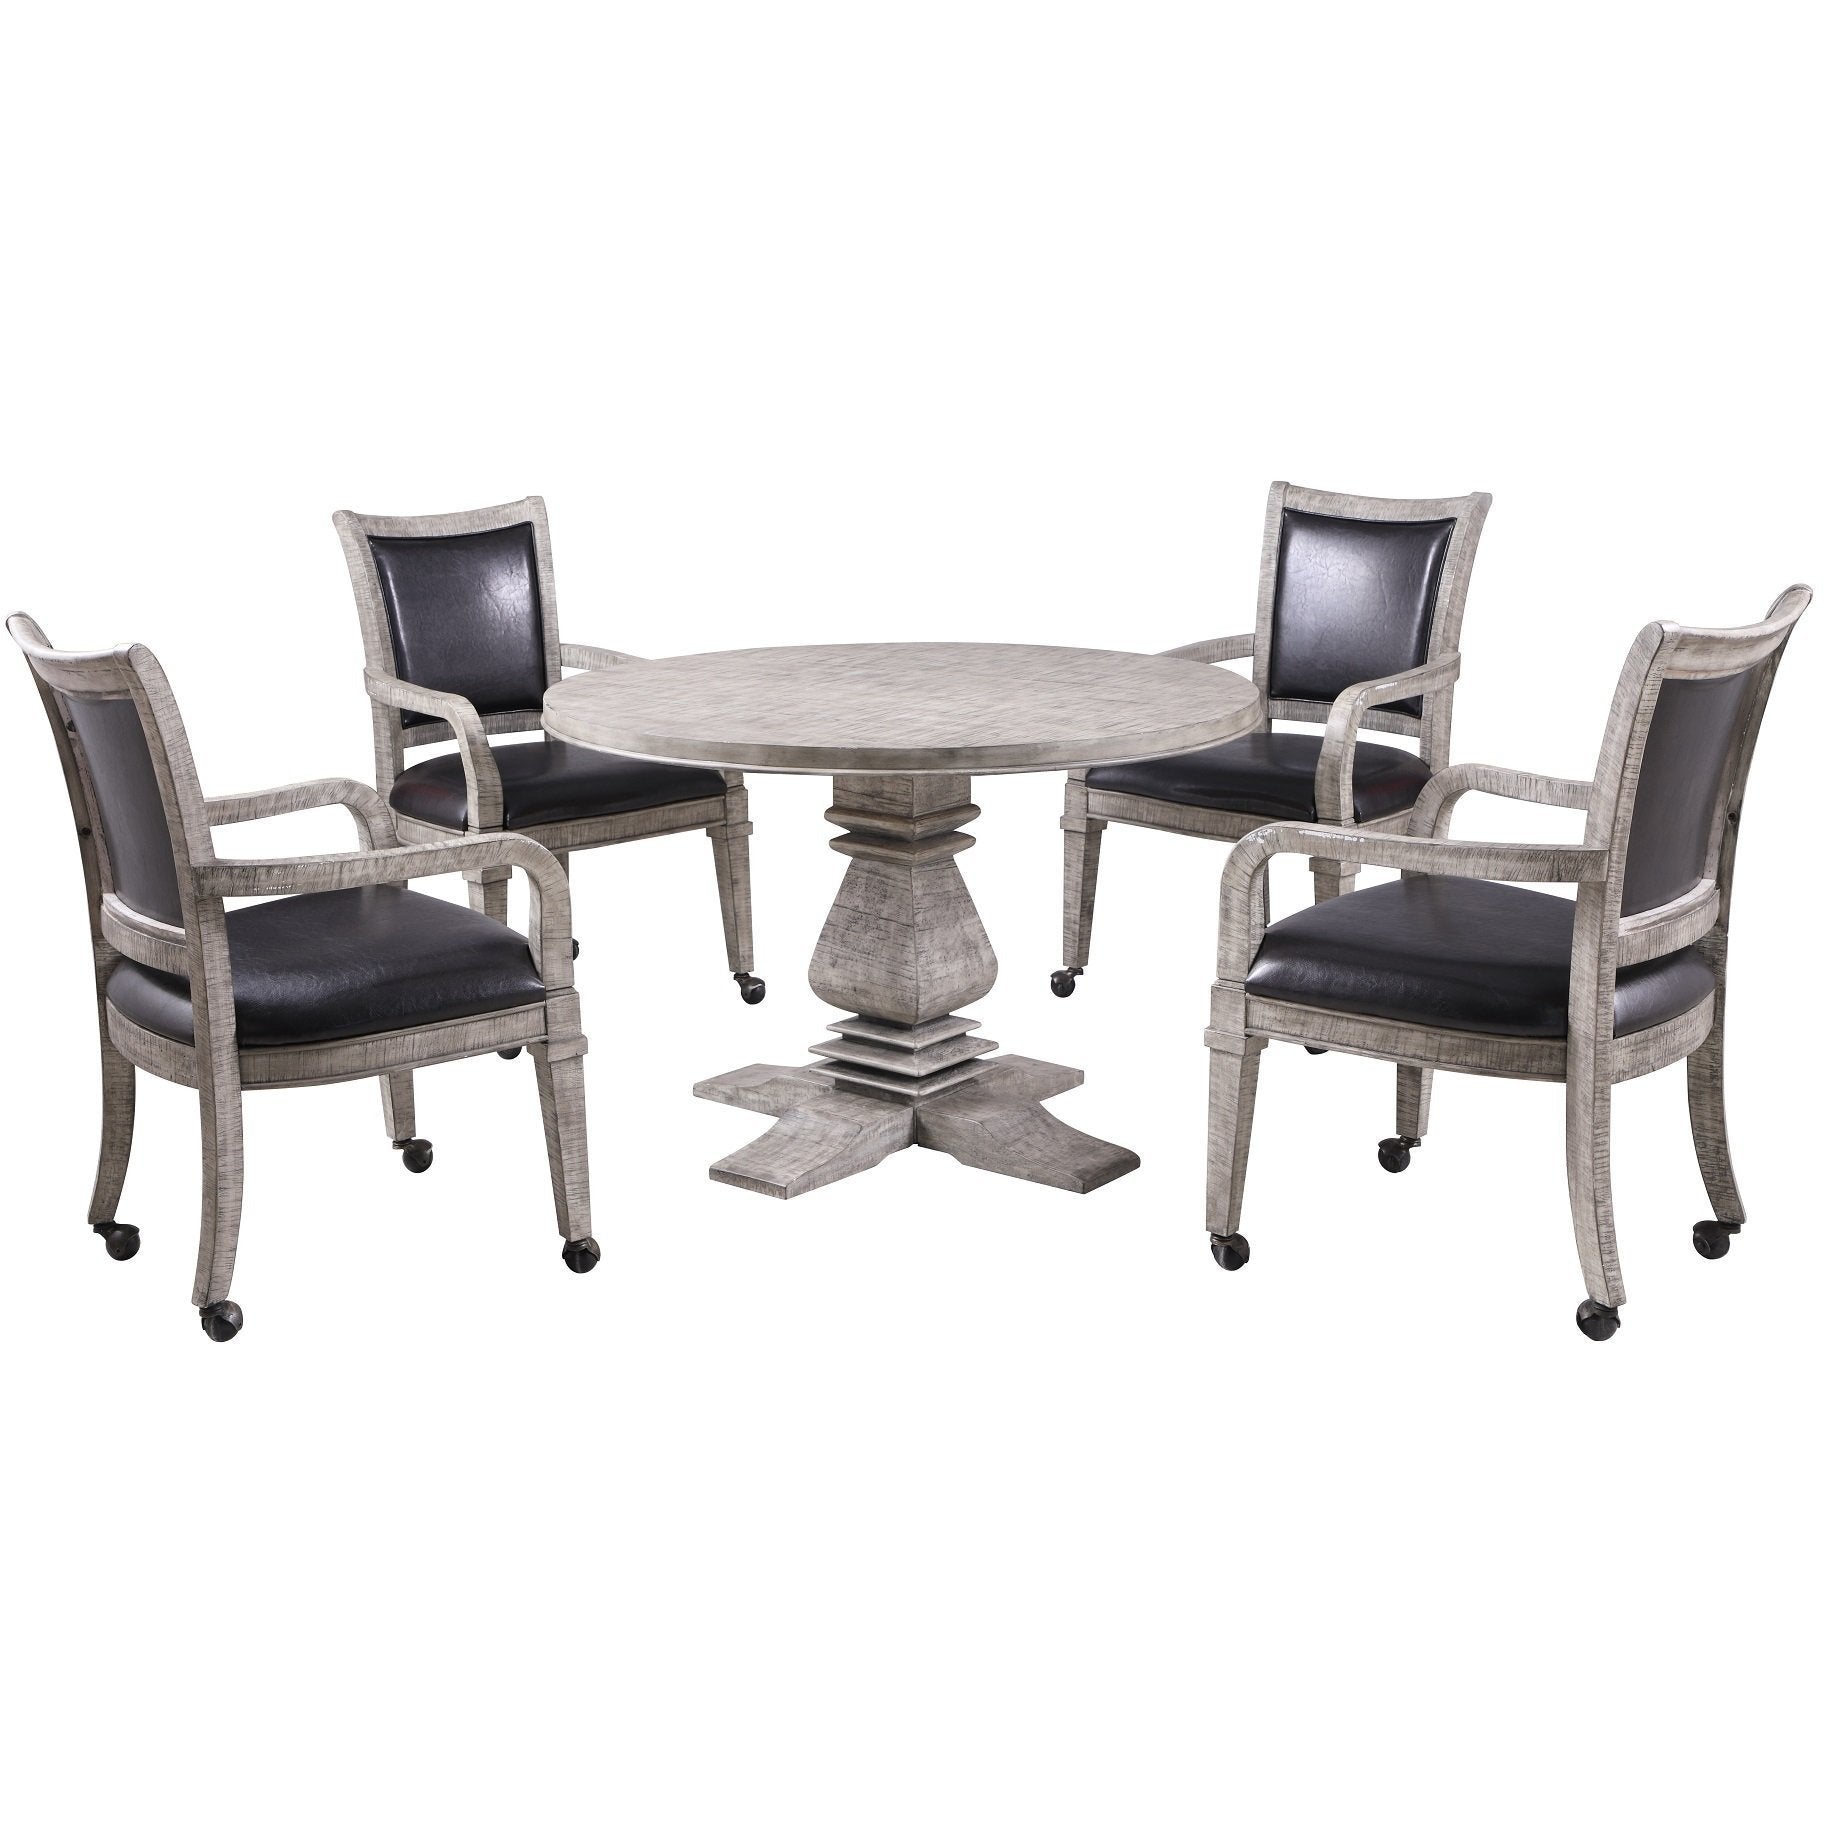 Hathaway Montecito Driftwood Round Poker Table with 4 Arm Chairs - Gaming Blaze